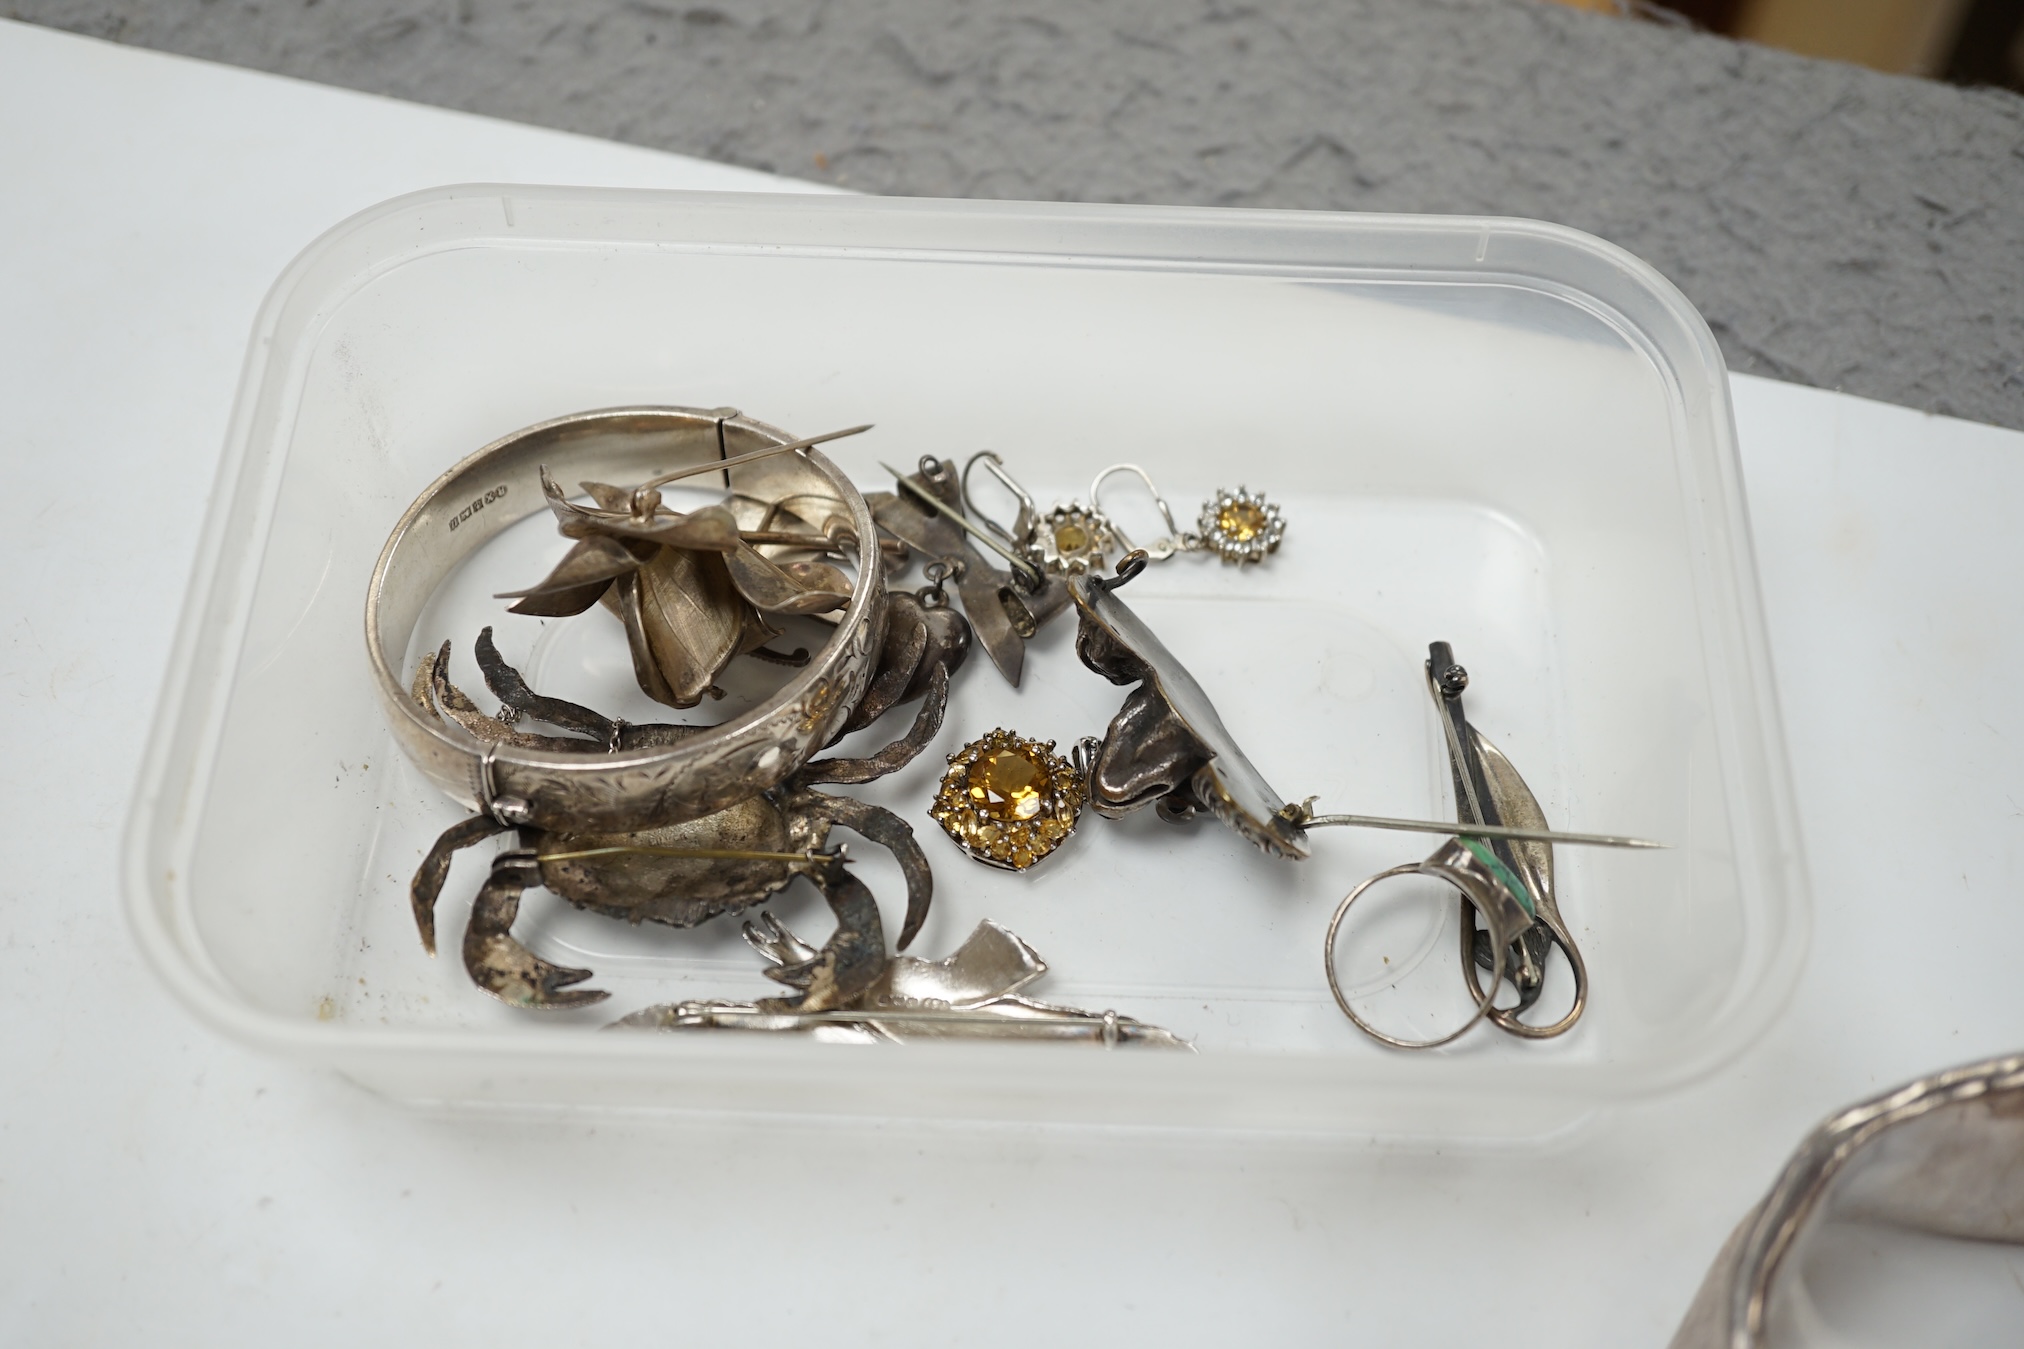 A small group of assorted silver and white metal jewellery, including bangles, brooches, etc. Condition - poor to fair